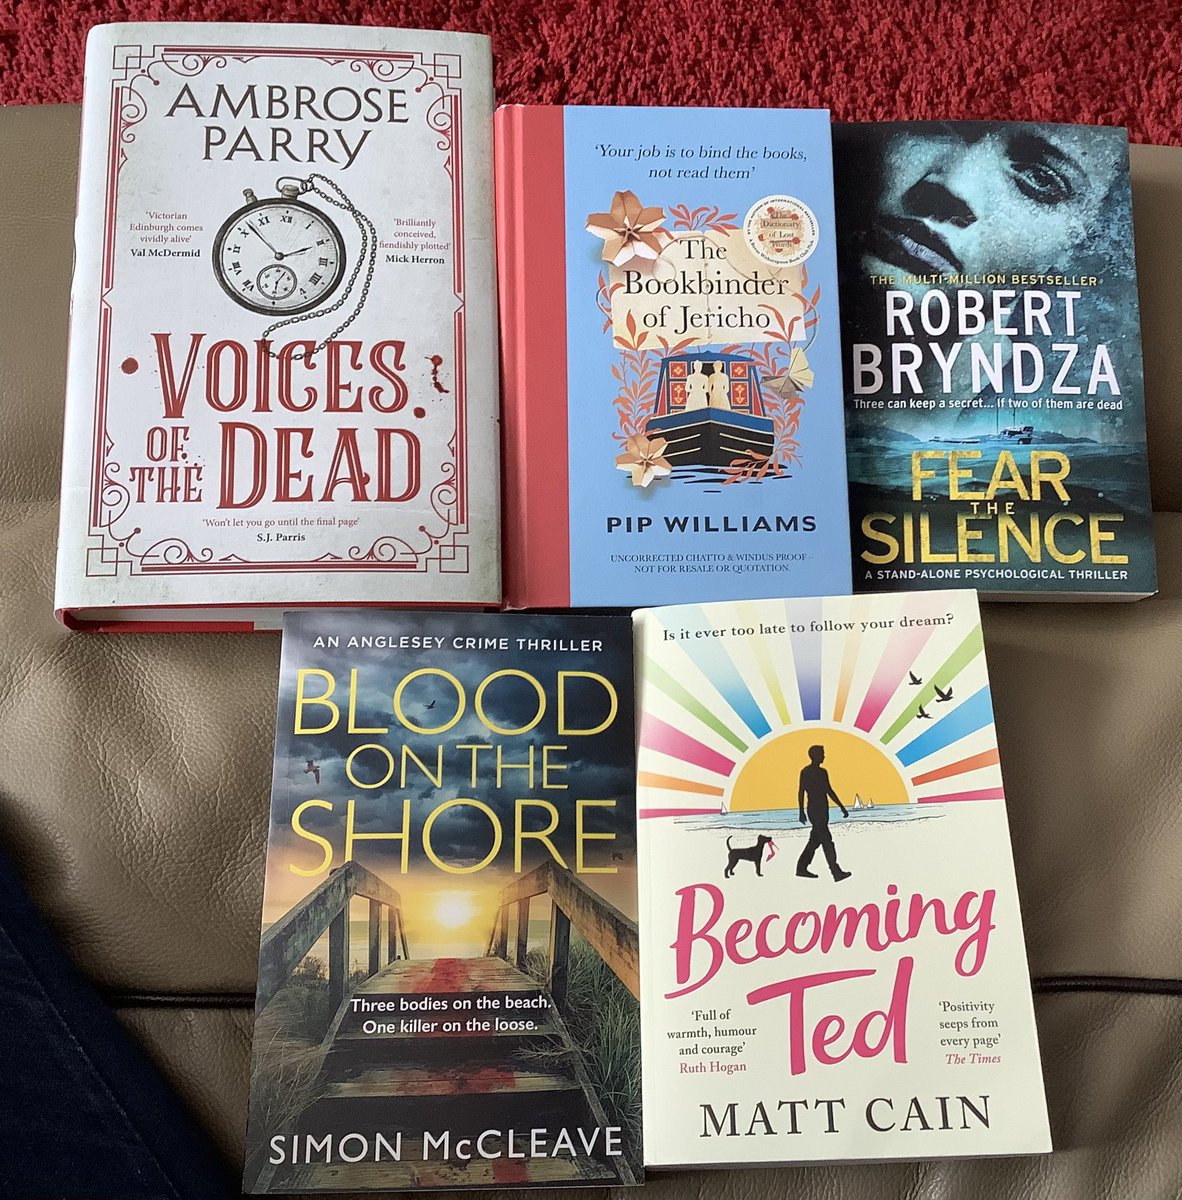 Back from holiday and what’s the first thing you do?

Put the kettle on?  No
Empty the suitcases?  No

Open your book post?  YES

#FearTheSilence #BecomingTed #TheBookbinderOfJericho #BloodOnTheShore #VoicesOfTheDead 

Excited to read all of these. I’m very lucky 🍀 

See below